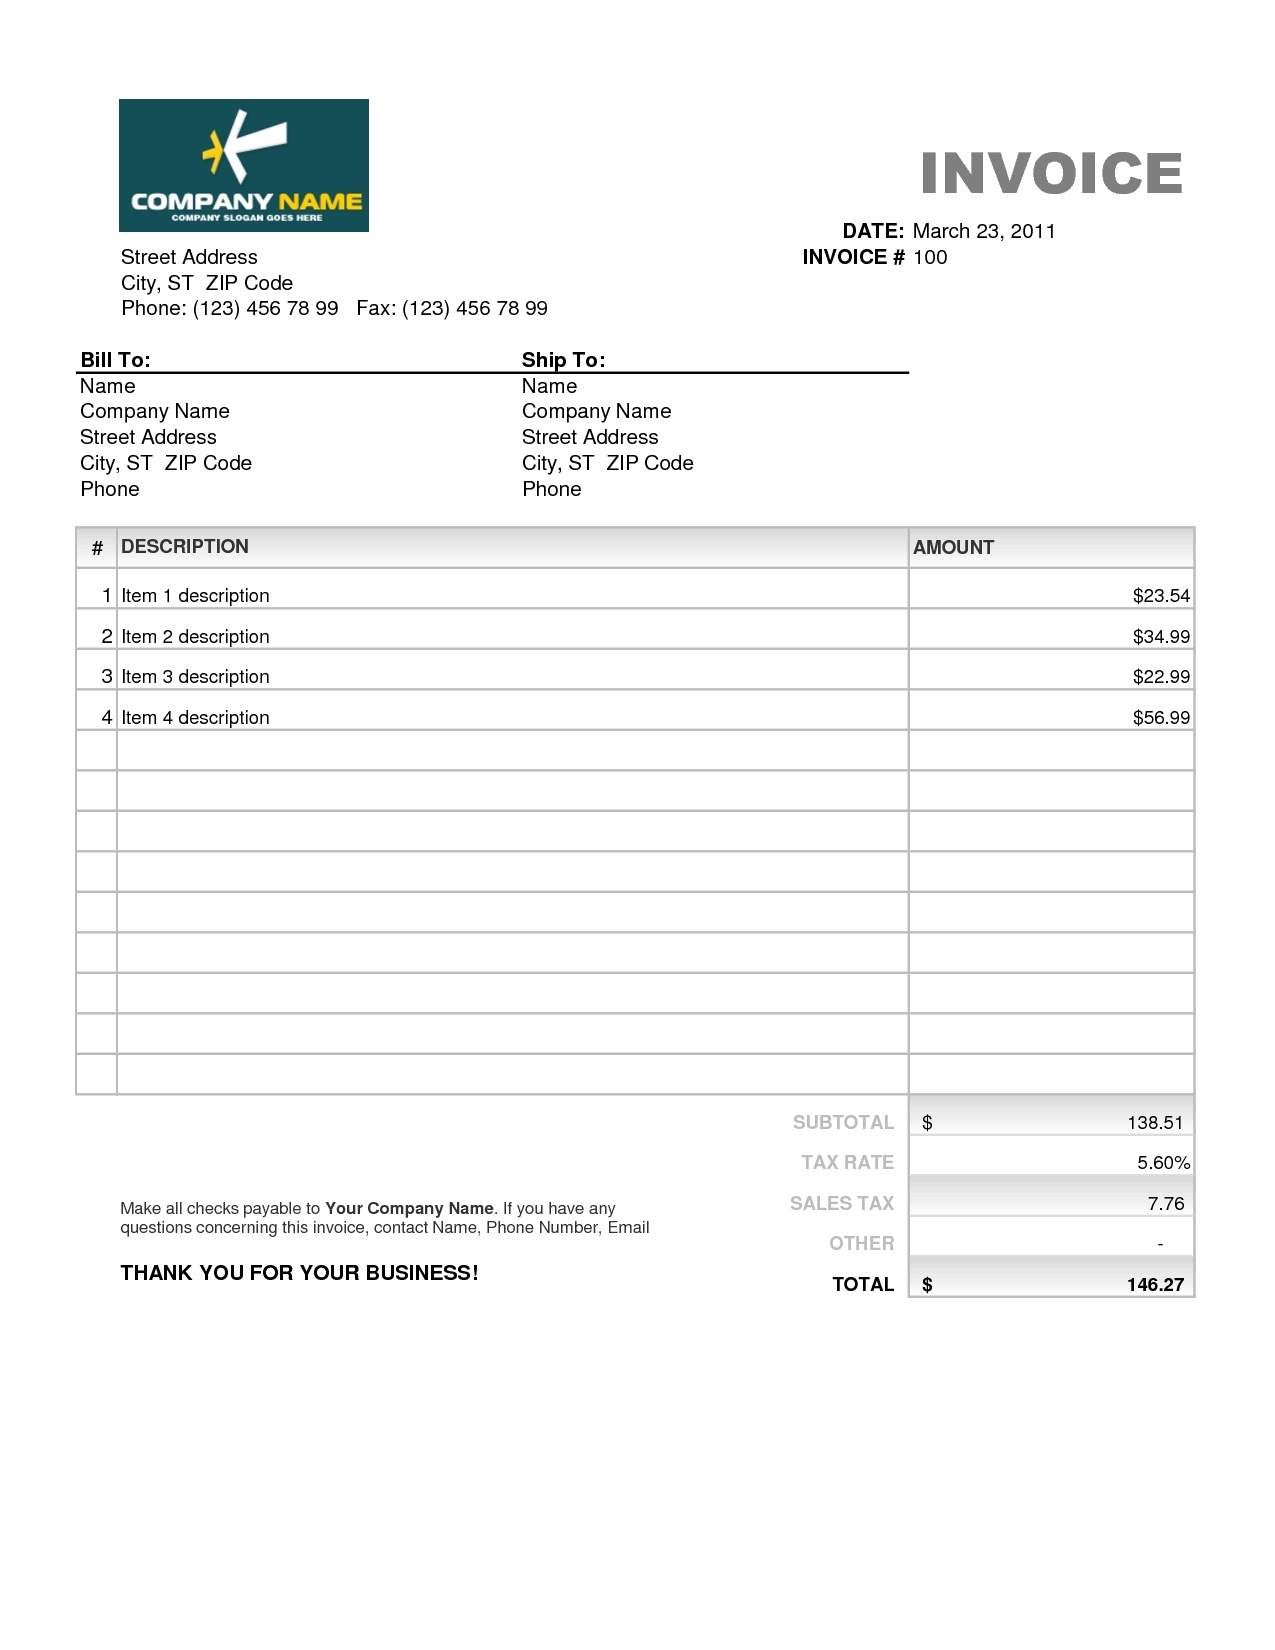 invoice excel template free download invoice template free 2016 invoice templates download